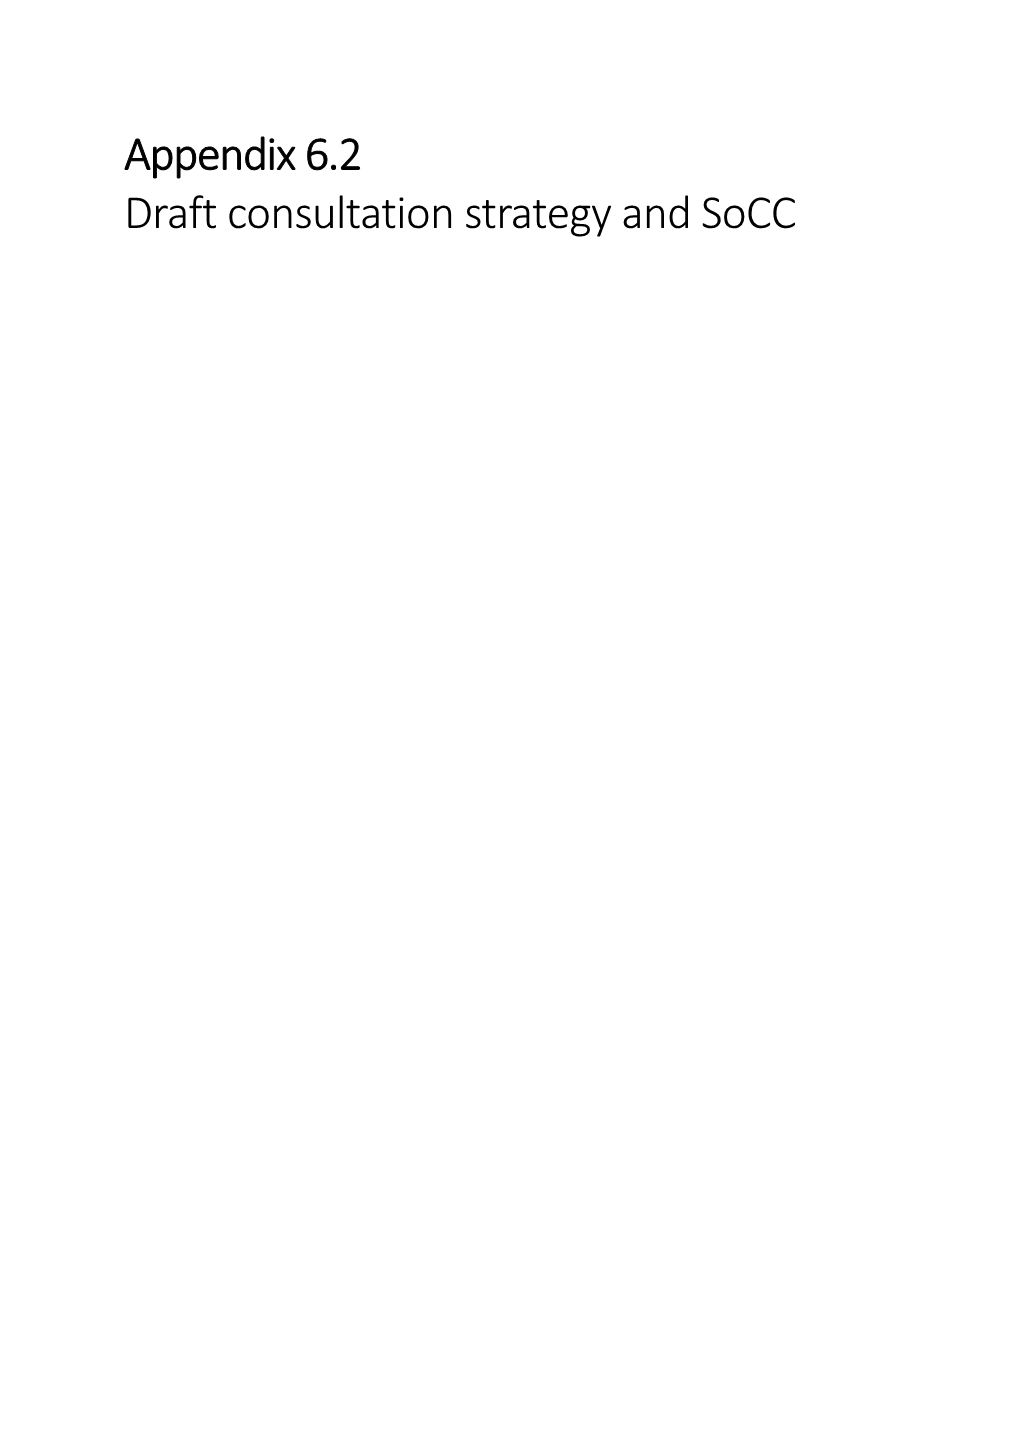 Appendix 6.2 Draft Consultation Strategy and Socc